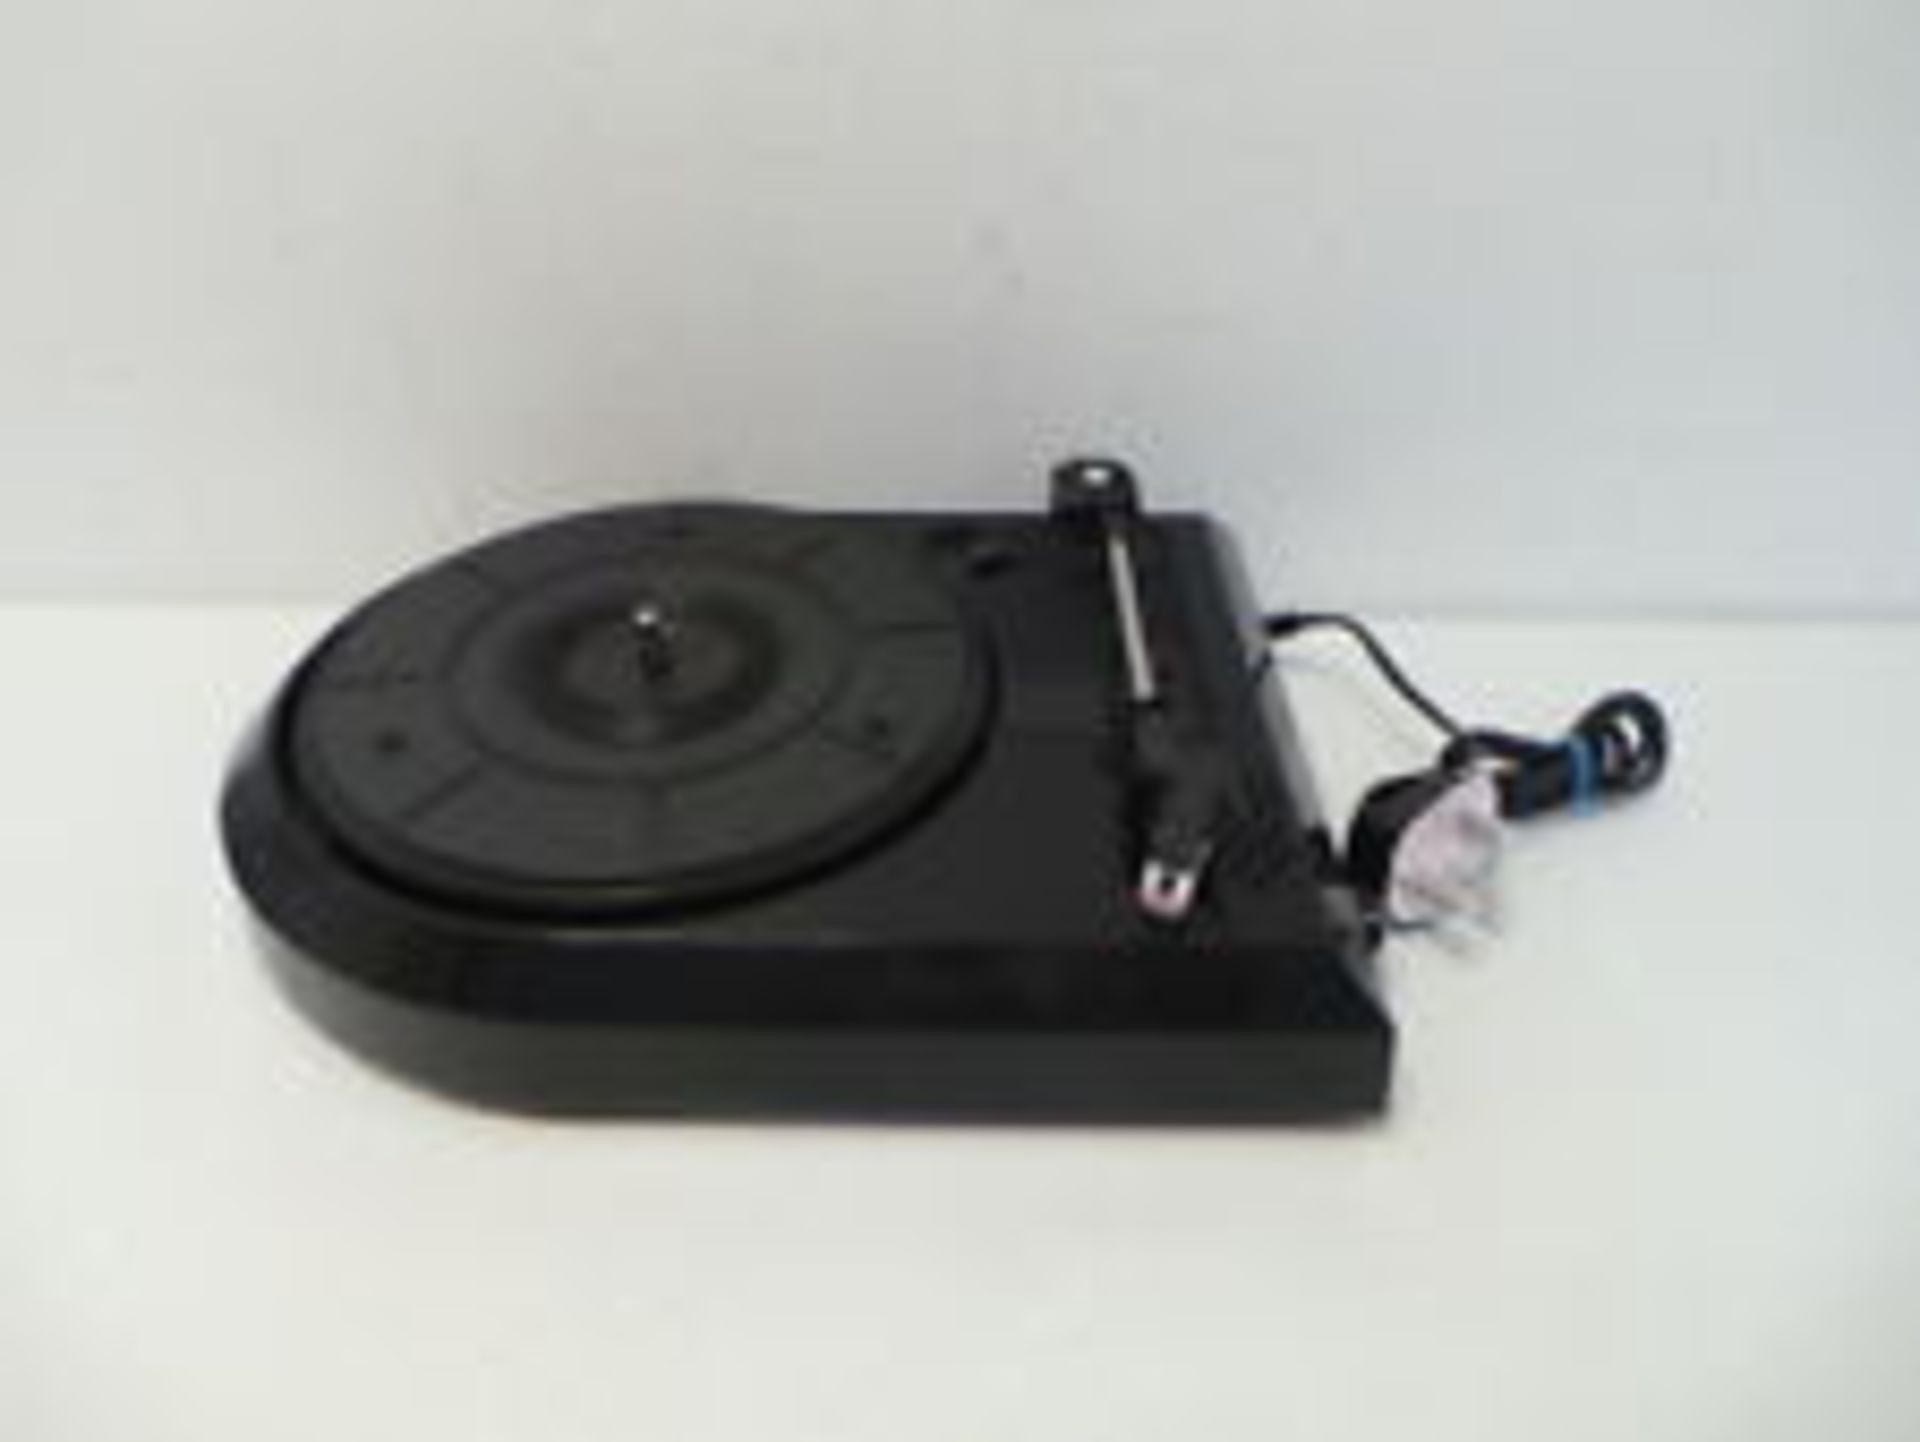 V Brand New Zennox USB Turntable With Built In Speaker With Volume Control Convert LP Records To - Image 2 of 2